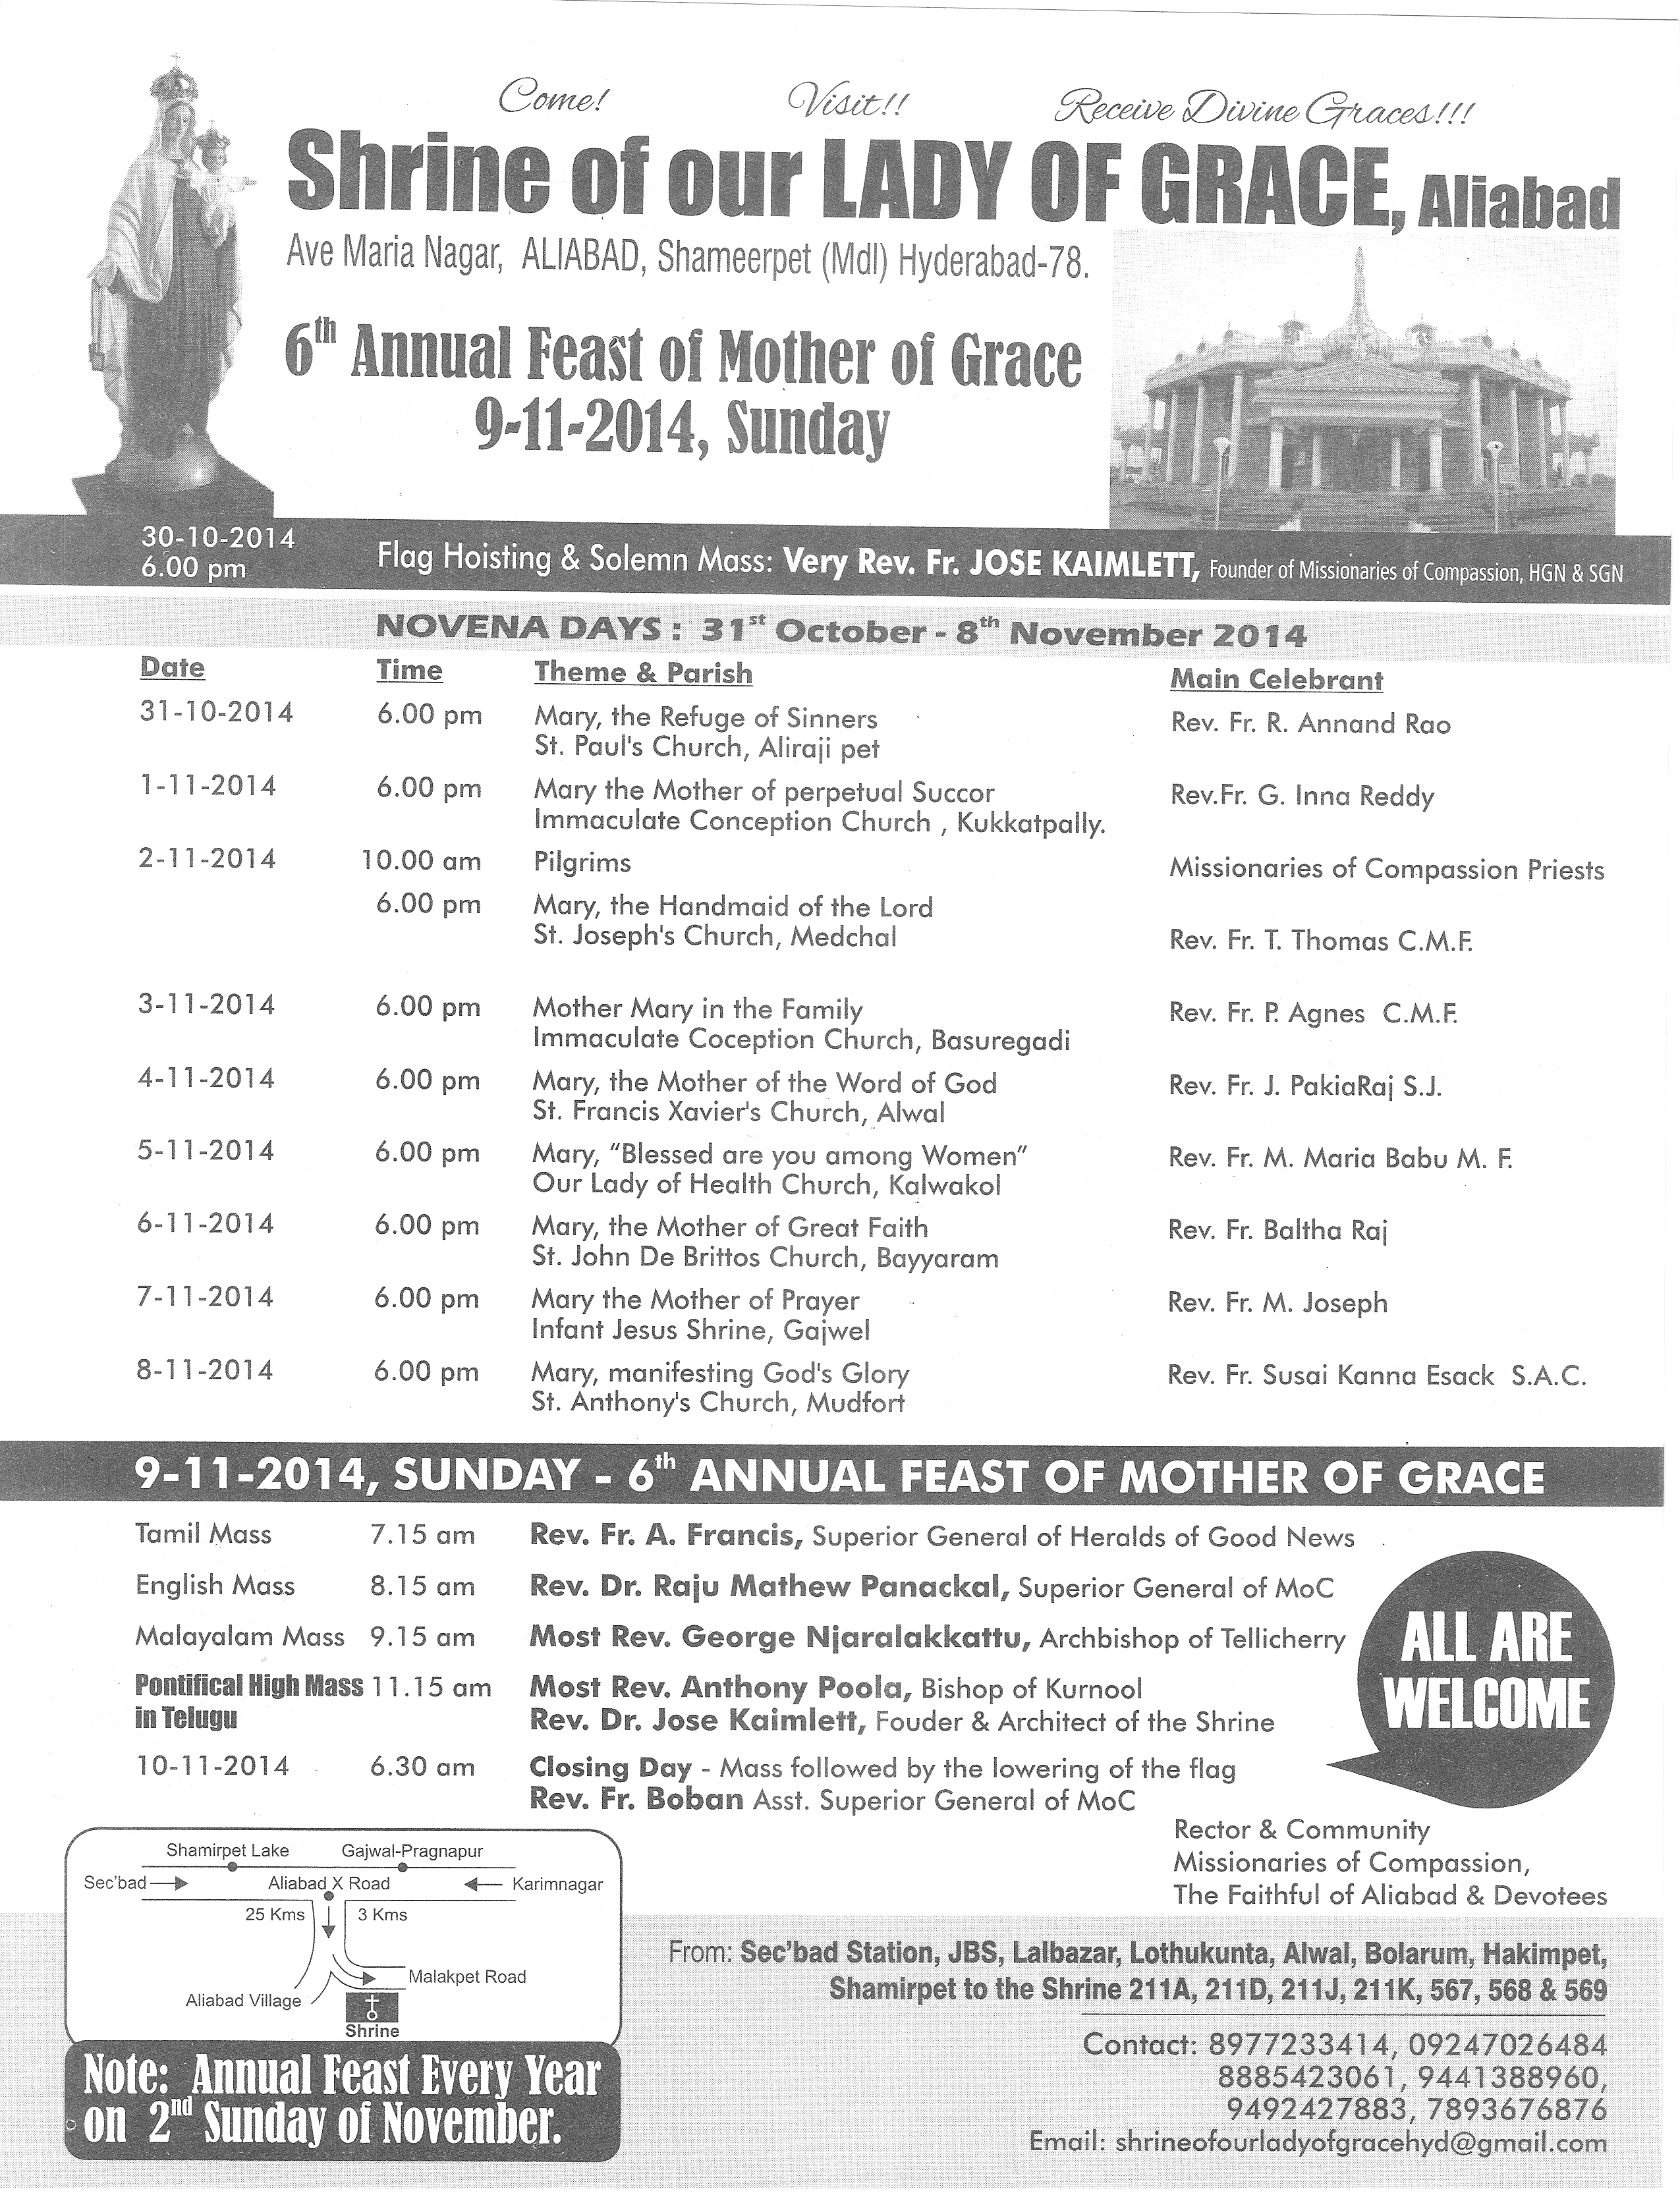 Annual Feast - Our Lady of Grace Shrine, Aliabad, Programme